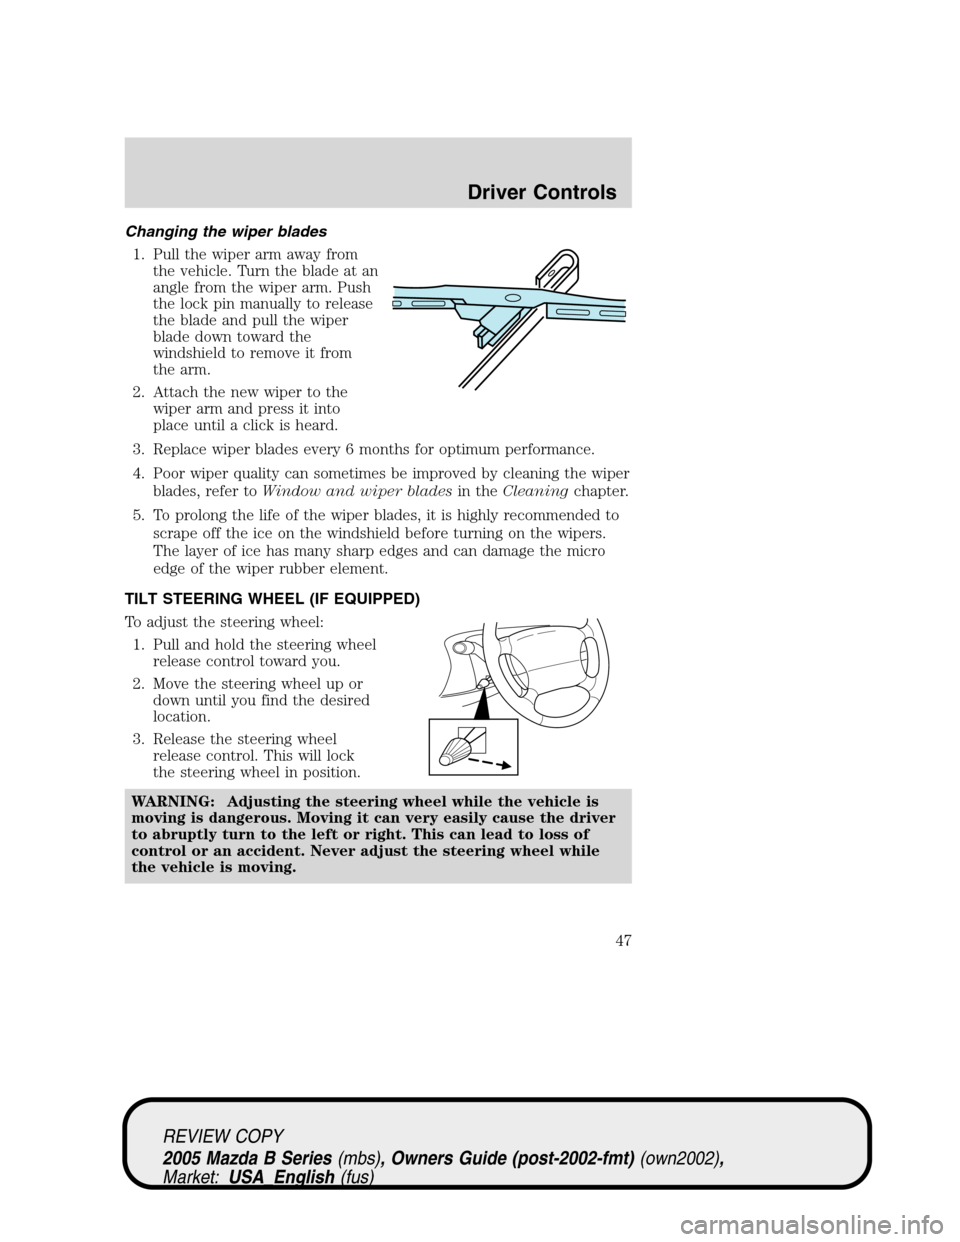 MAZDA MODEL B2300 TRUCK 2005  Owners Manual (in English) Changing the wiper blades
1. Pull the wiper arm away from
the vehicle. Turn the blade at an
angle from the wiper arm. Push
the lock pin manually to release
the blade and pull the wiper
blade down towa